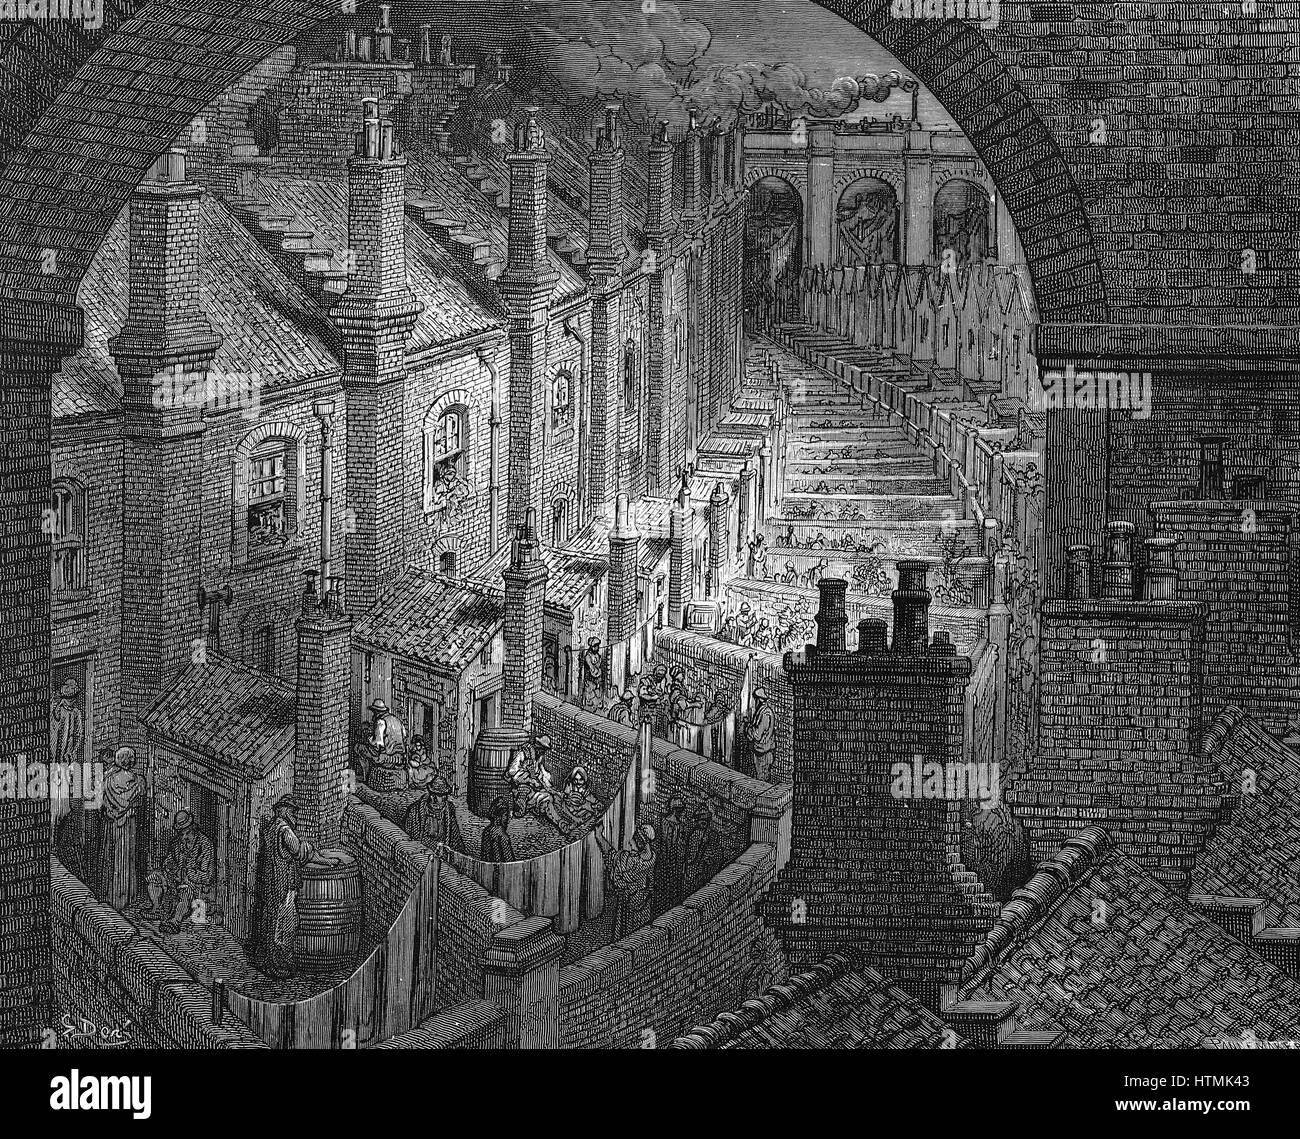 'Over London by Rail' From Gustave Dore and Blanchard Jerrold 'London: A Pilgrimage' London 1872. Back view of typical 19th century London artisan terrace houses with washhouses, privies and yards leading on to alley serving them and similar terrace., all Stock Photo